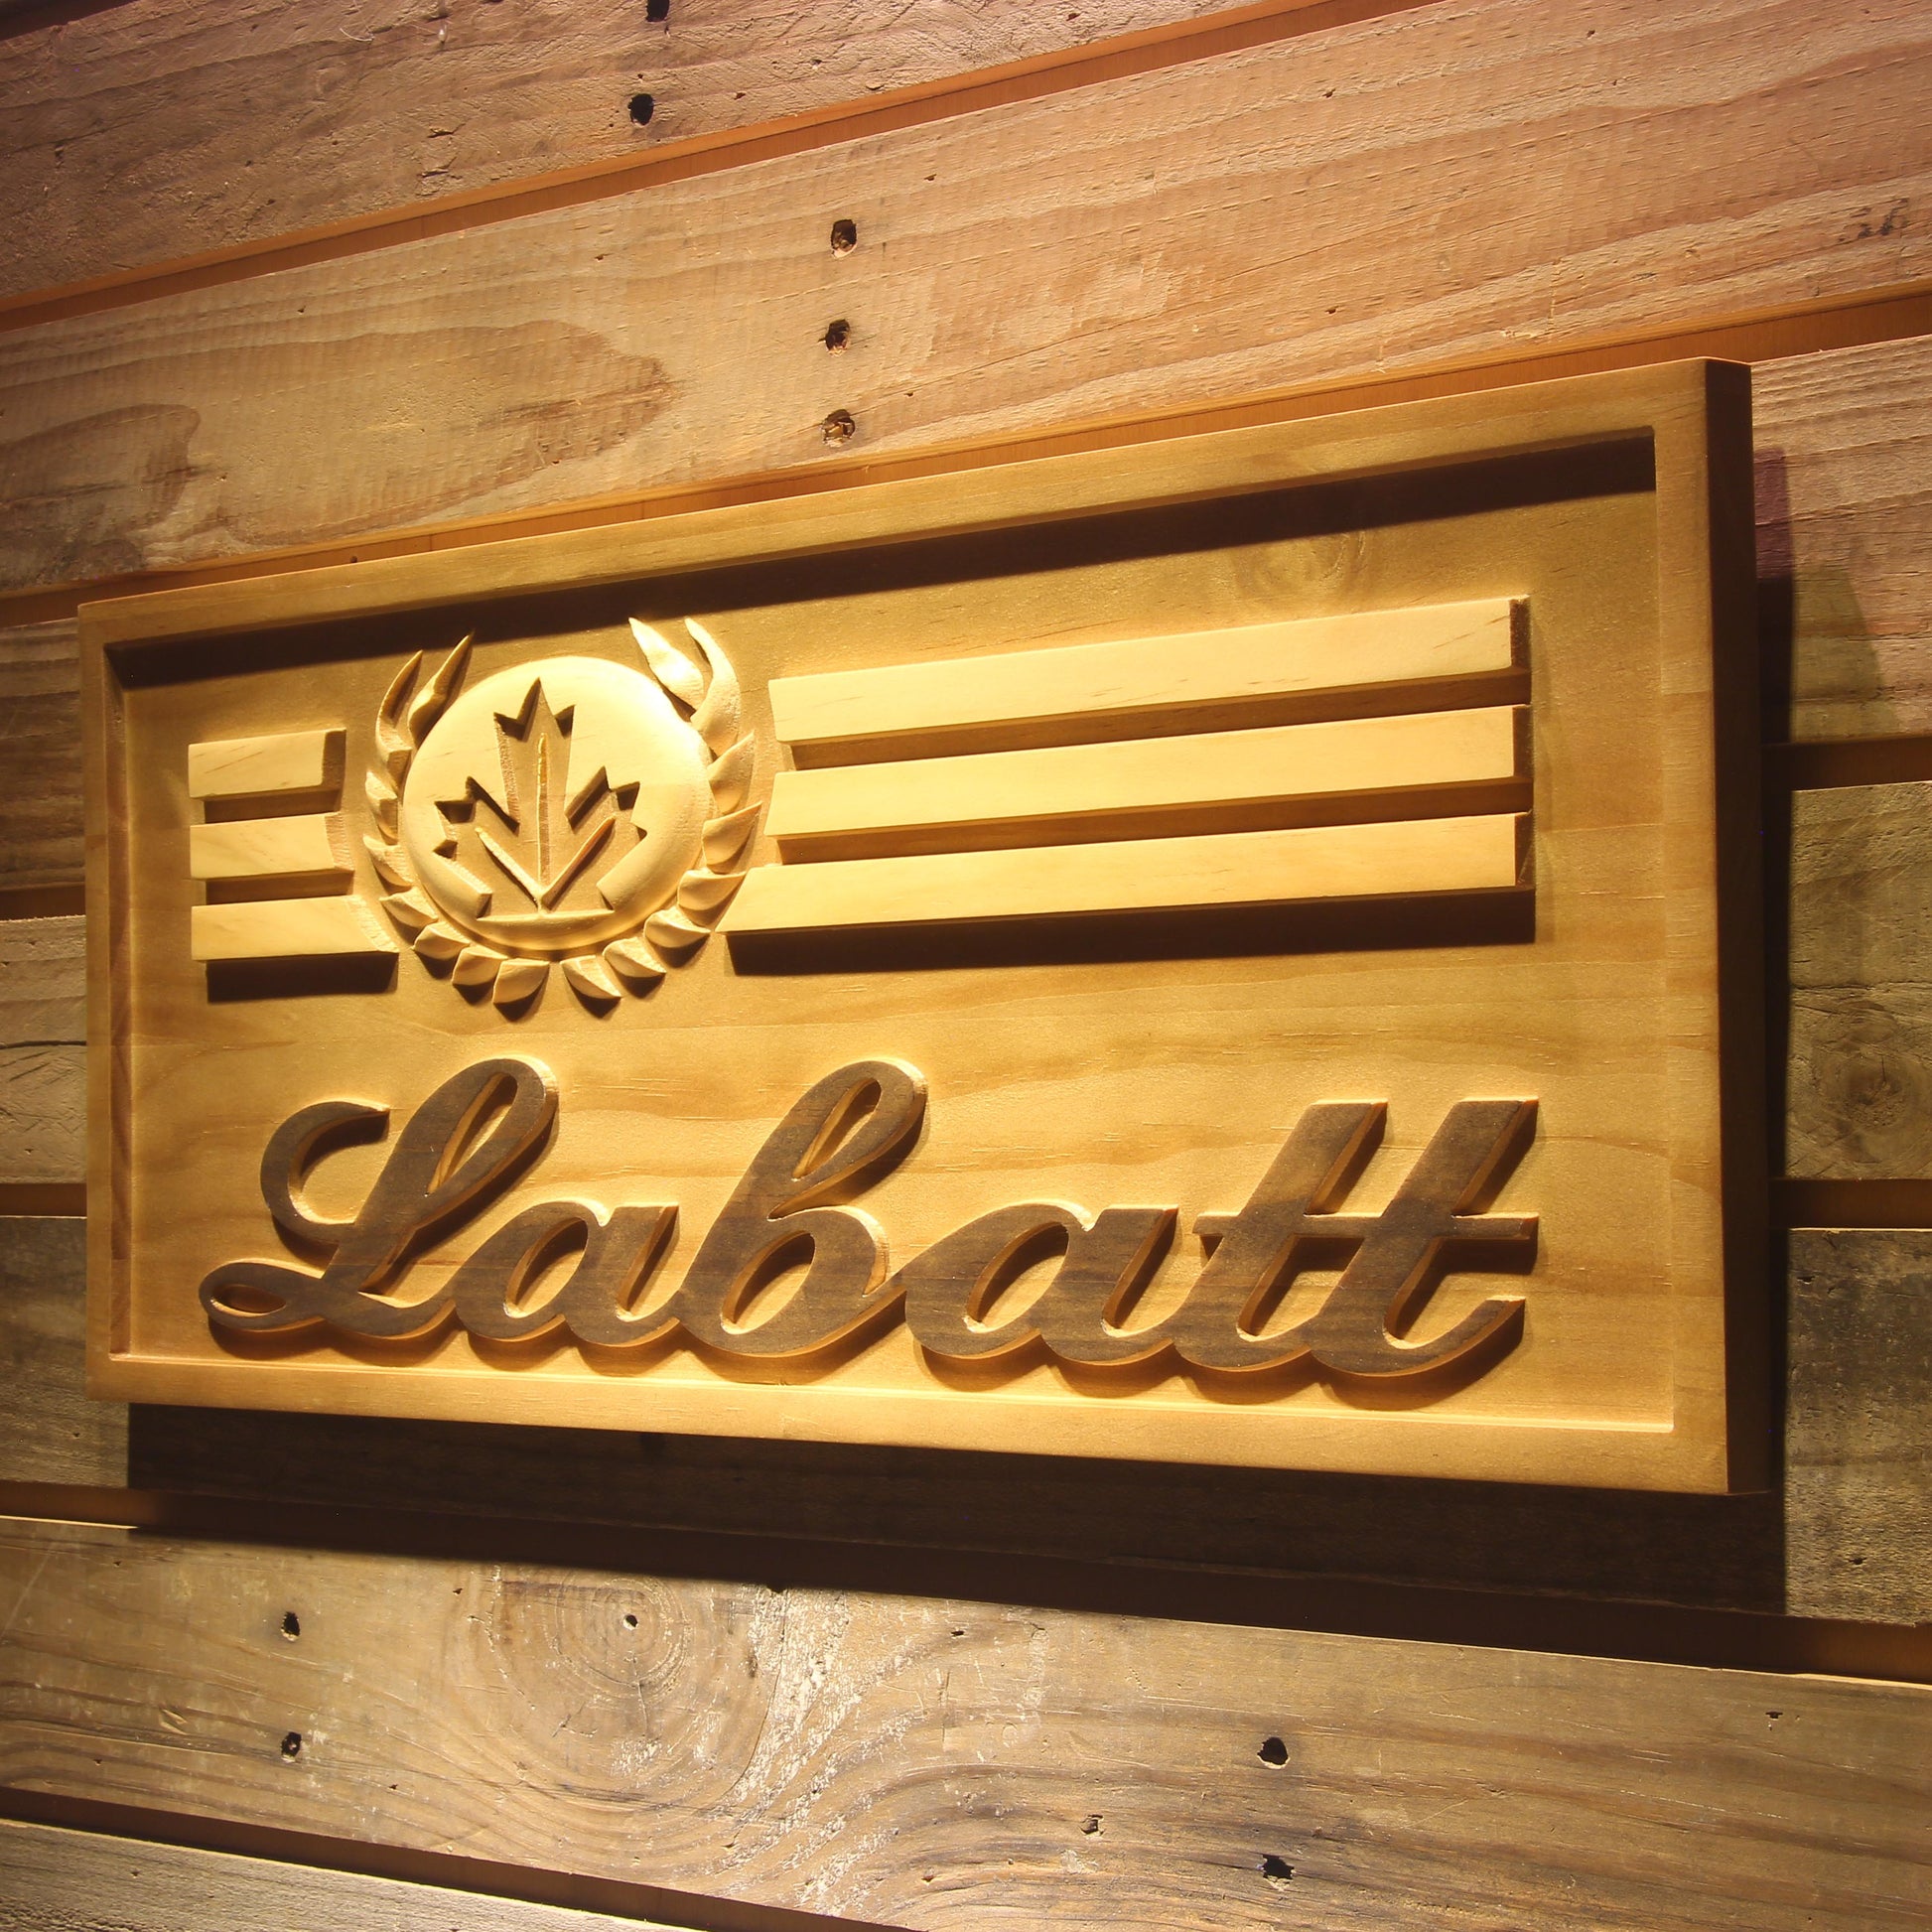 Labatt  3D Wooden Bar Signs by Woody Signs Co. - Handmade Crafted Unique Wooden Creative